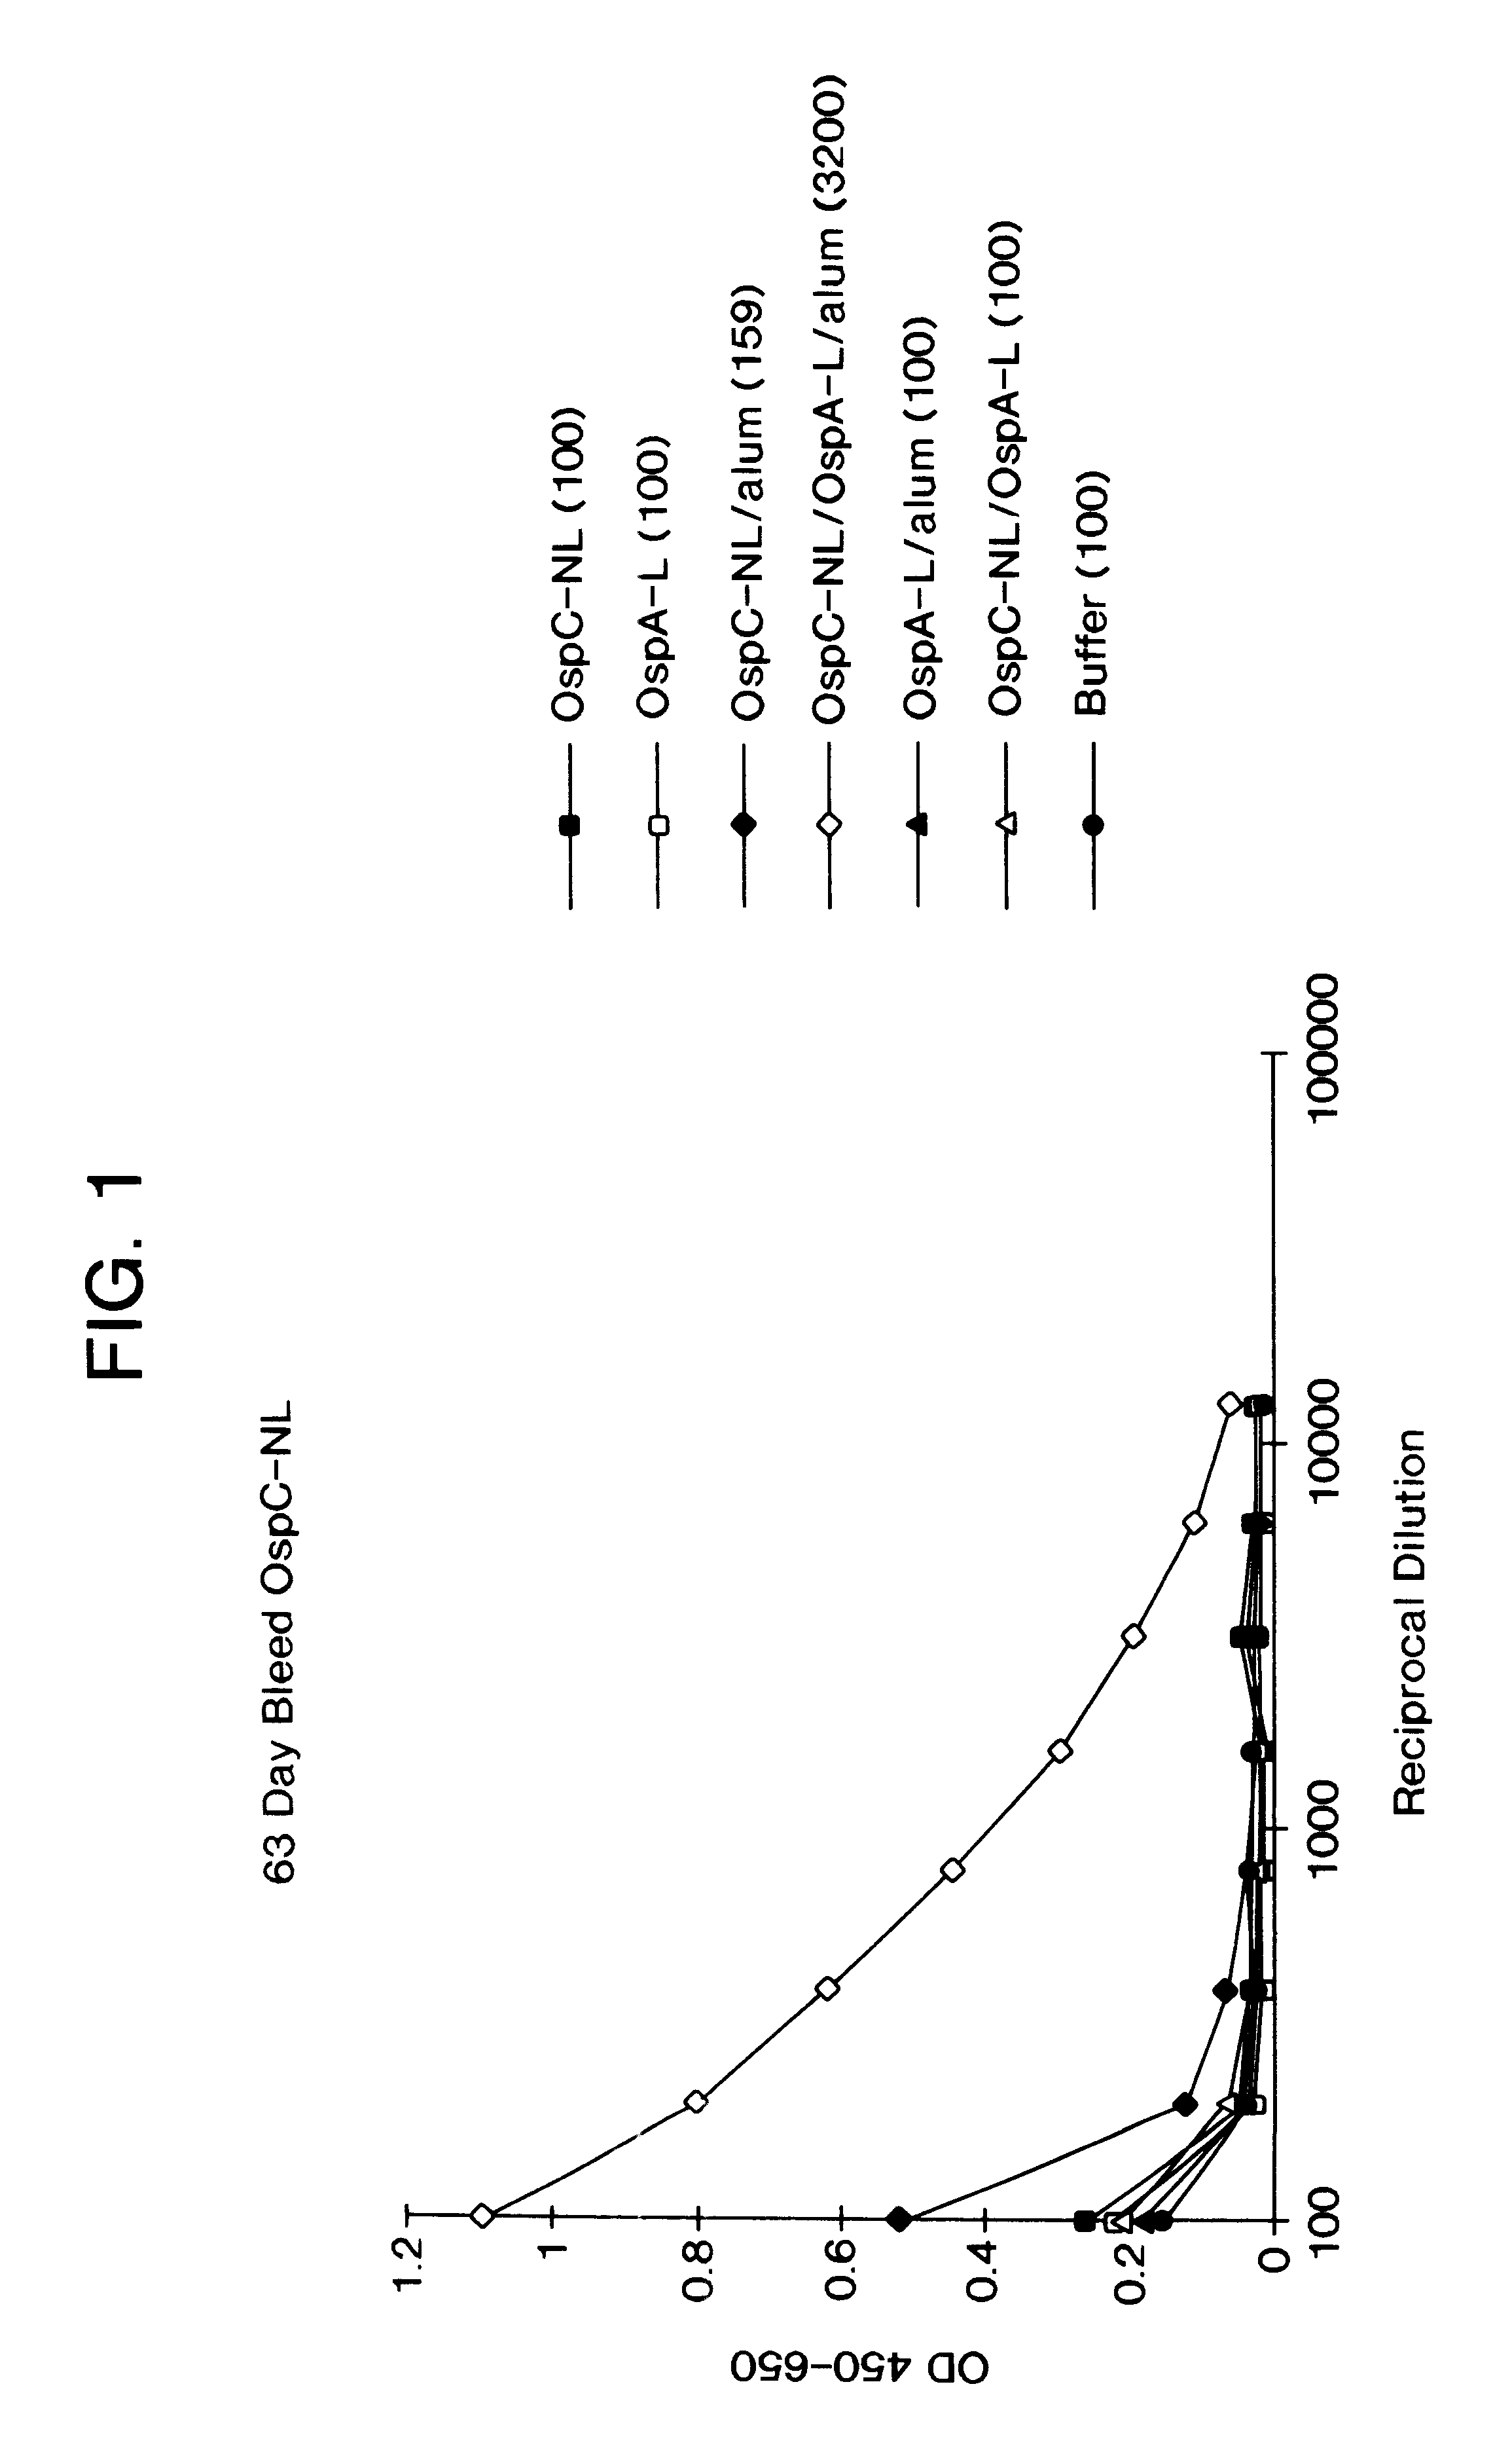 Immunological combination compositions and methods